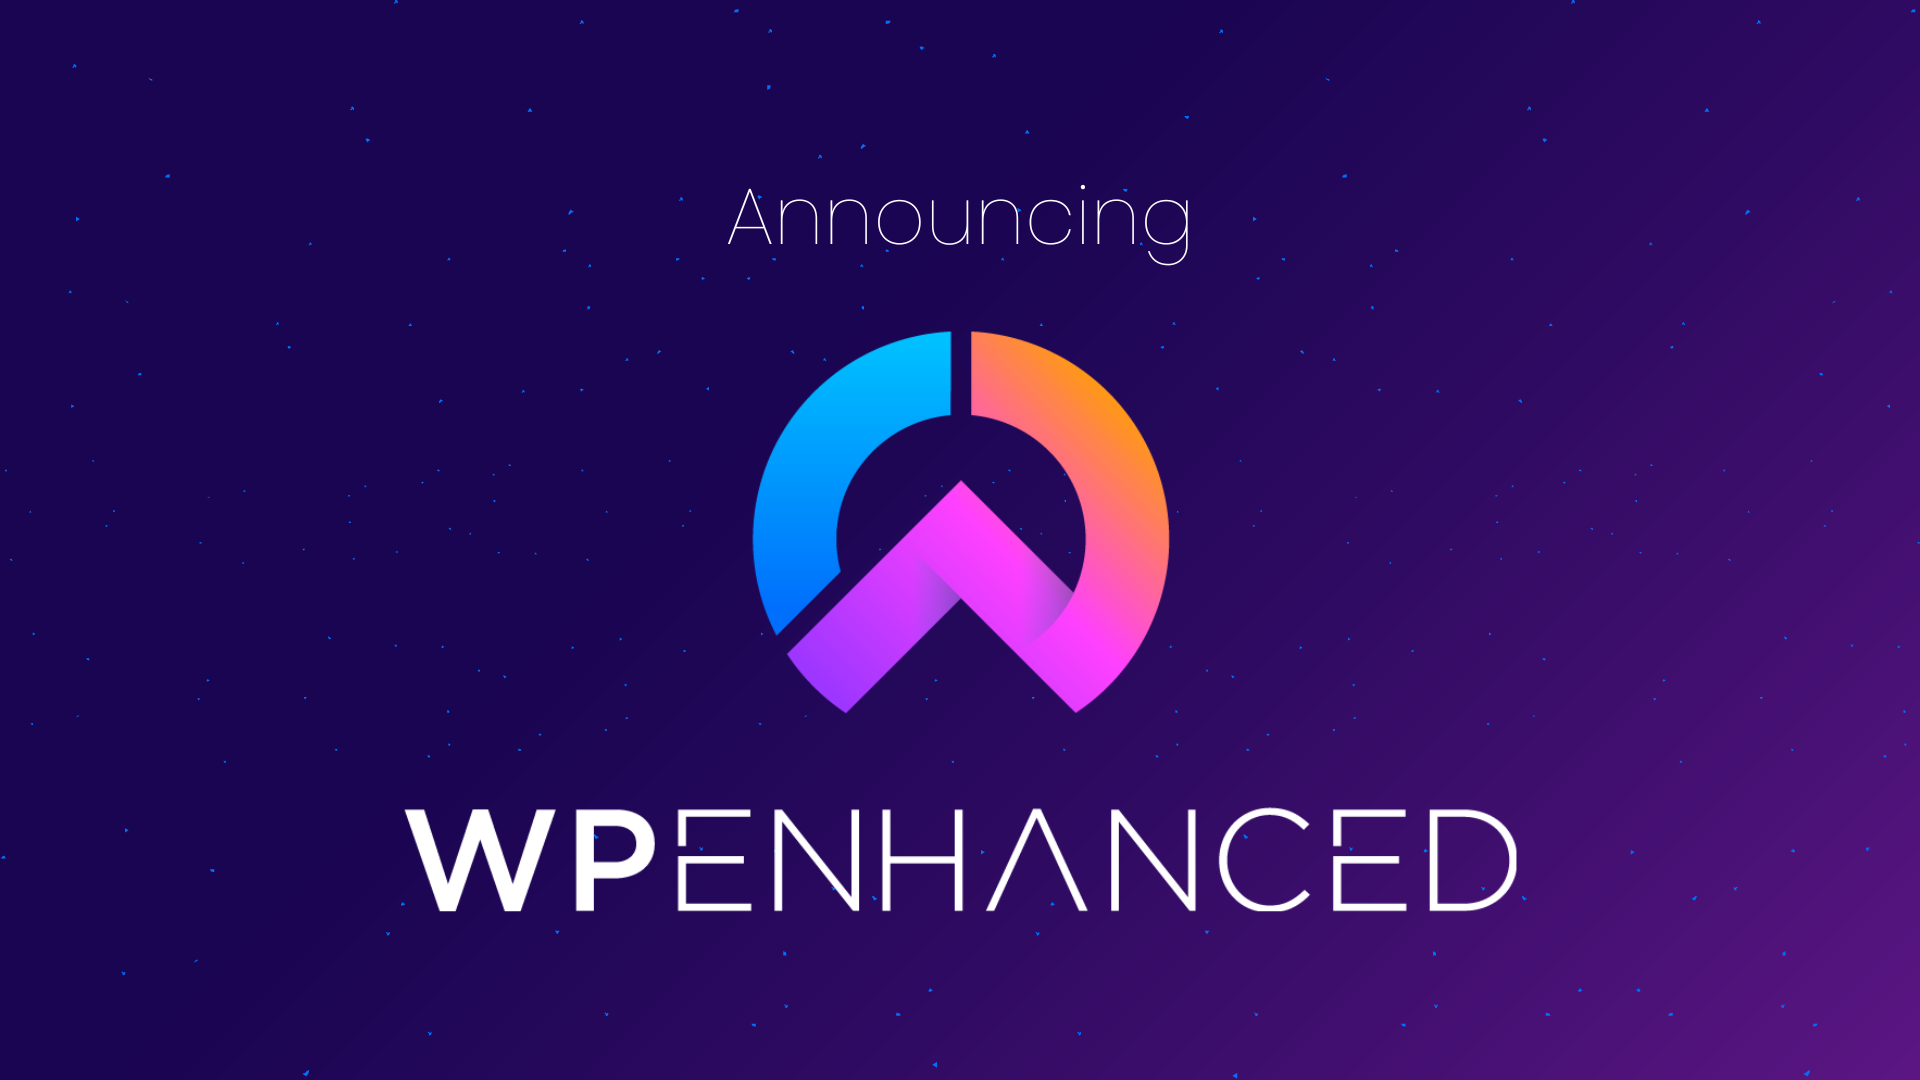 Announcing WP Enhanced, our sister company focussed on WordPress plugins.